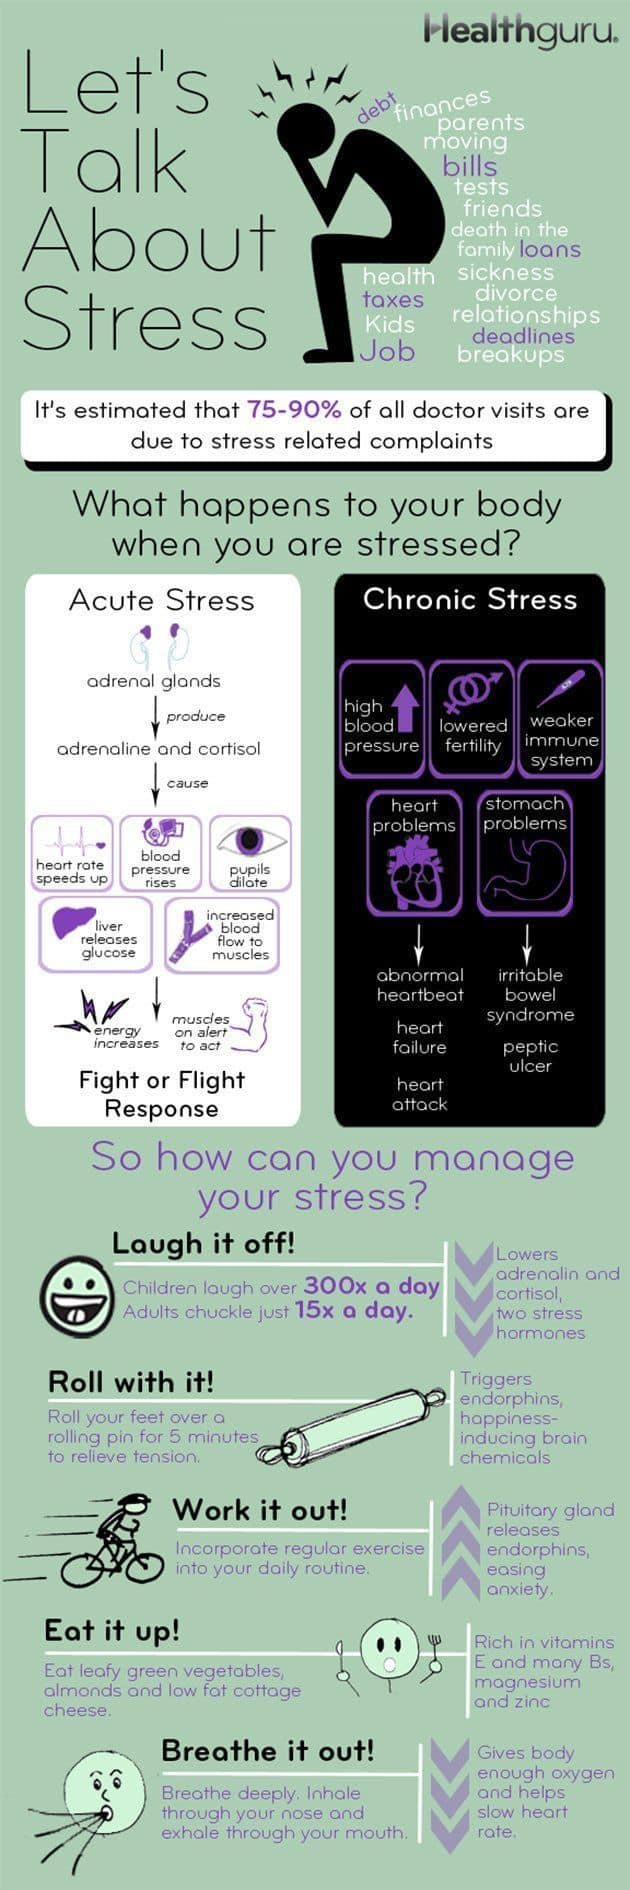 Let’s Talk About Stress Infographic